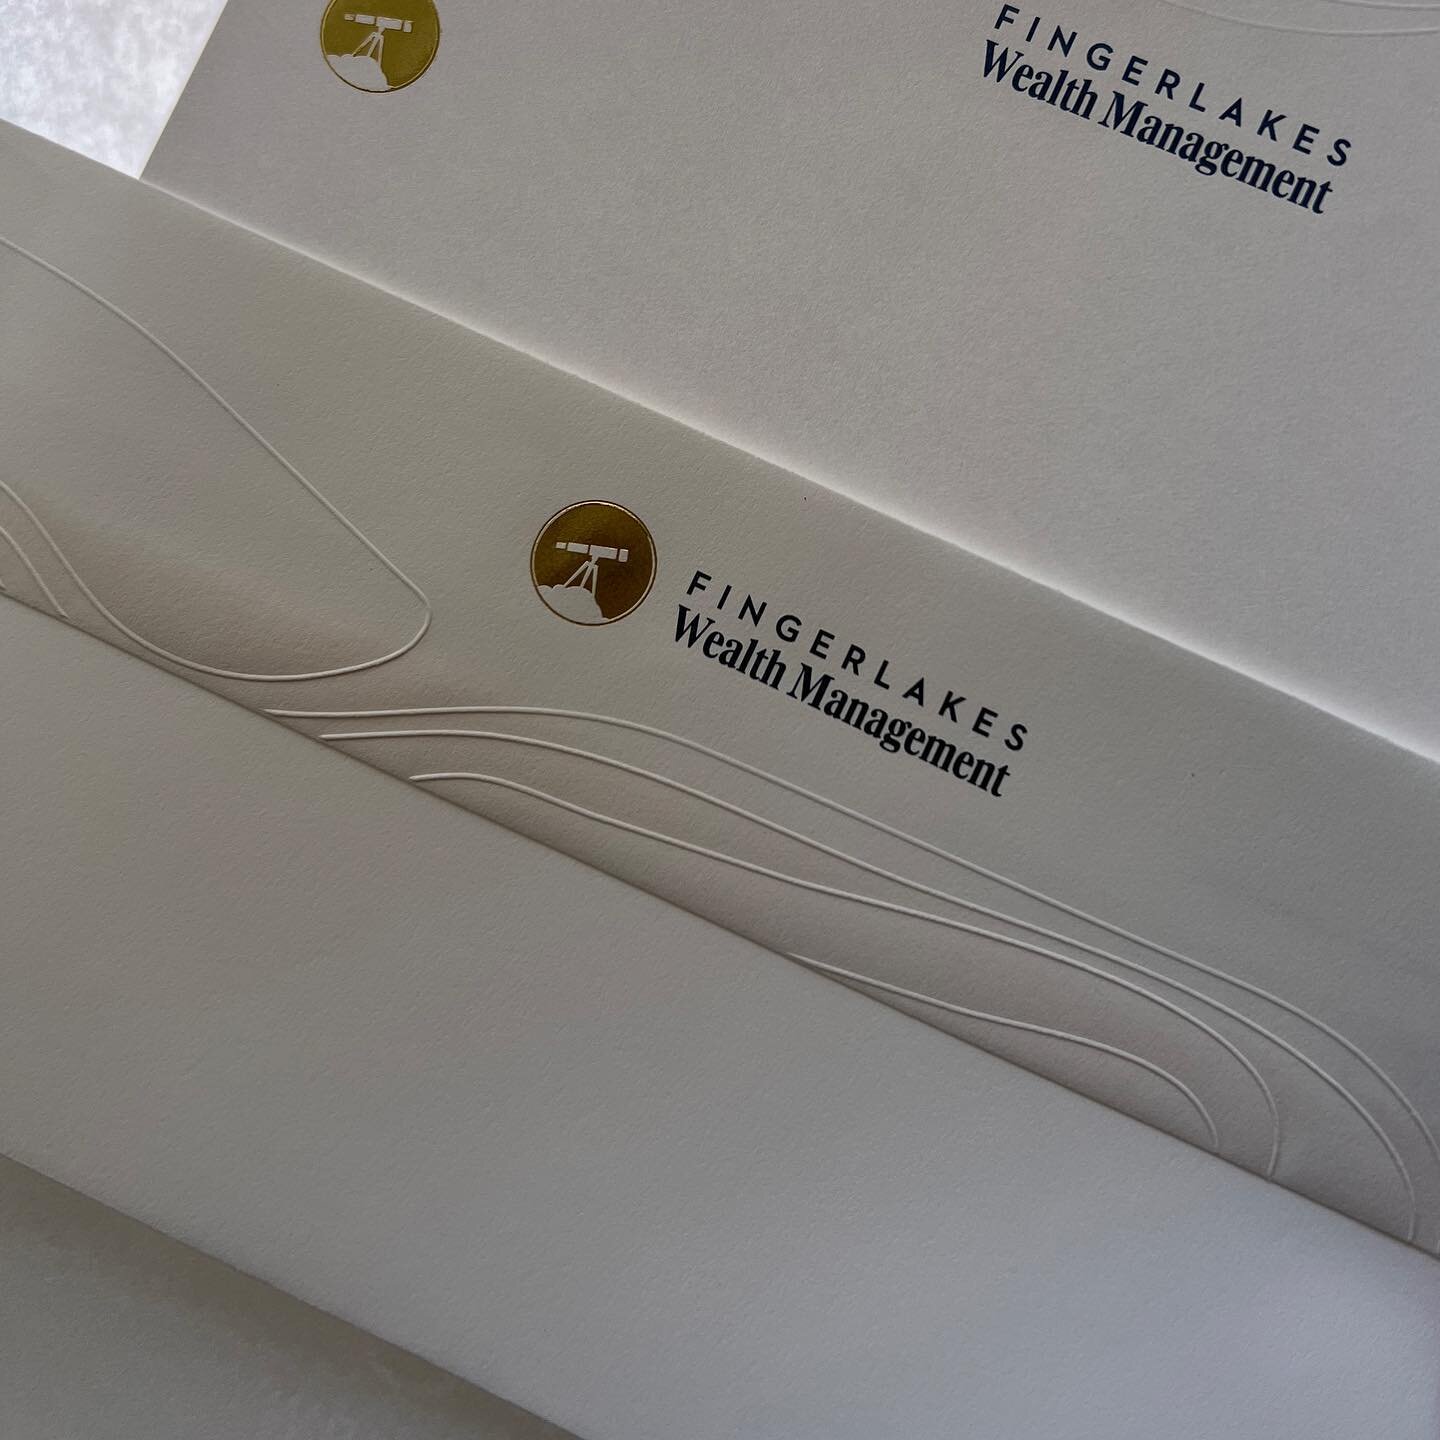 Finger Lakes Wealth Management engaged us to design a business card, letterhead and envelope to showcase their brand new logo designed by @flourishdesignstudio. If you are fortunate enough to know the folks at @fingerlakeswm then you understand why g